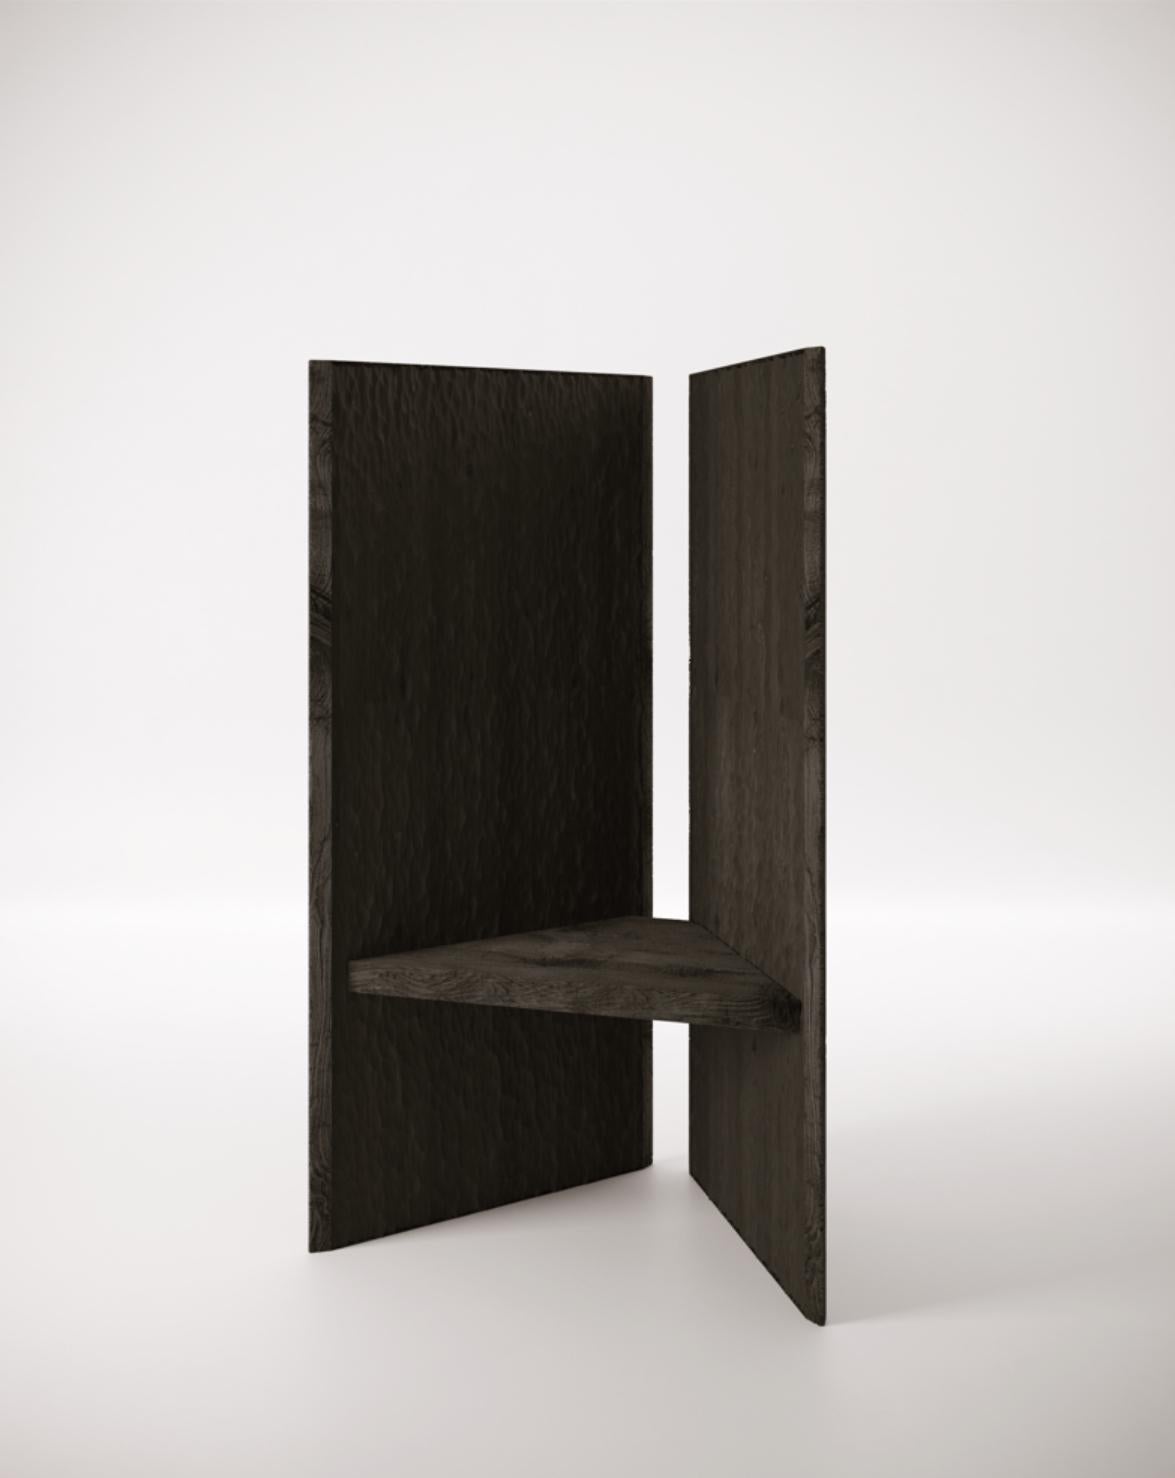 Geb throne by Studiopepe.
Dimensions: W 150 x D 90 x H 73 cm
Materials: Black wood.

Multifaceted design agency Studiopepe was founded in Milan in 2006. Eclectic, voguish, it is the
brainchild of Chiara di Pinto and Arianna Lelli Mami, both of